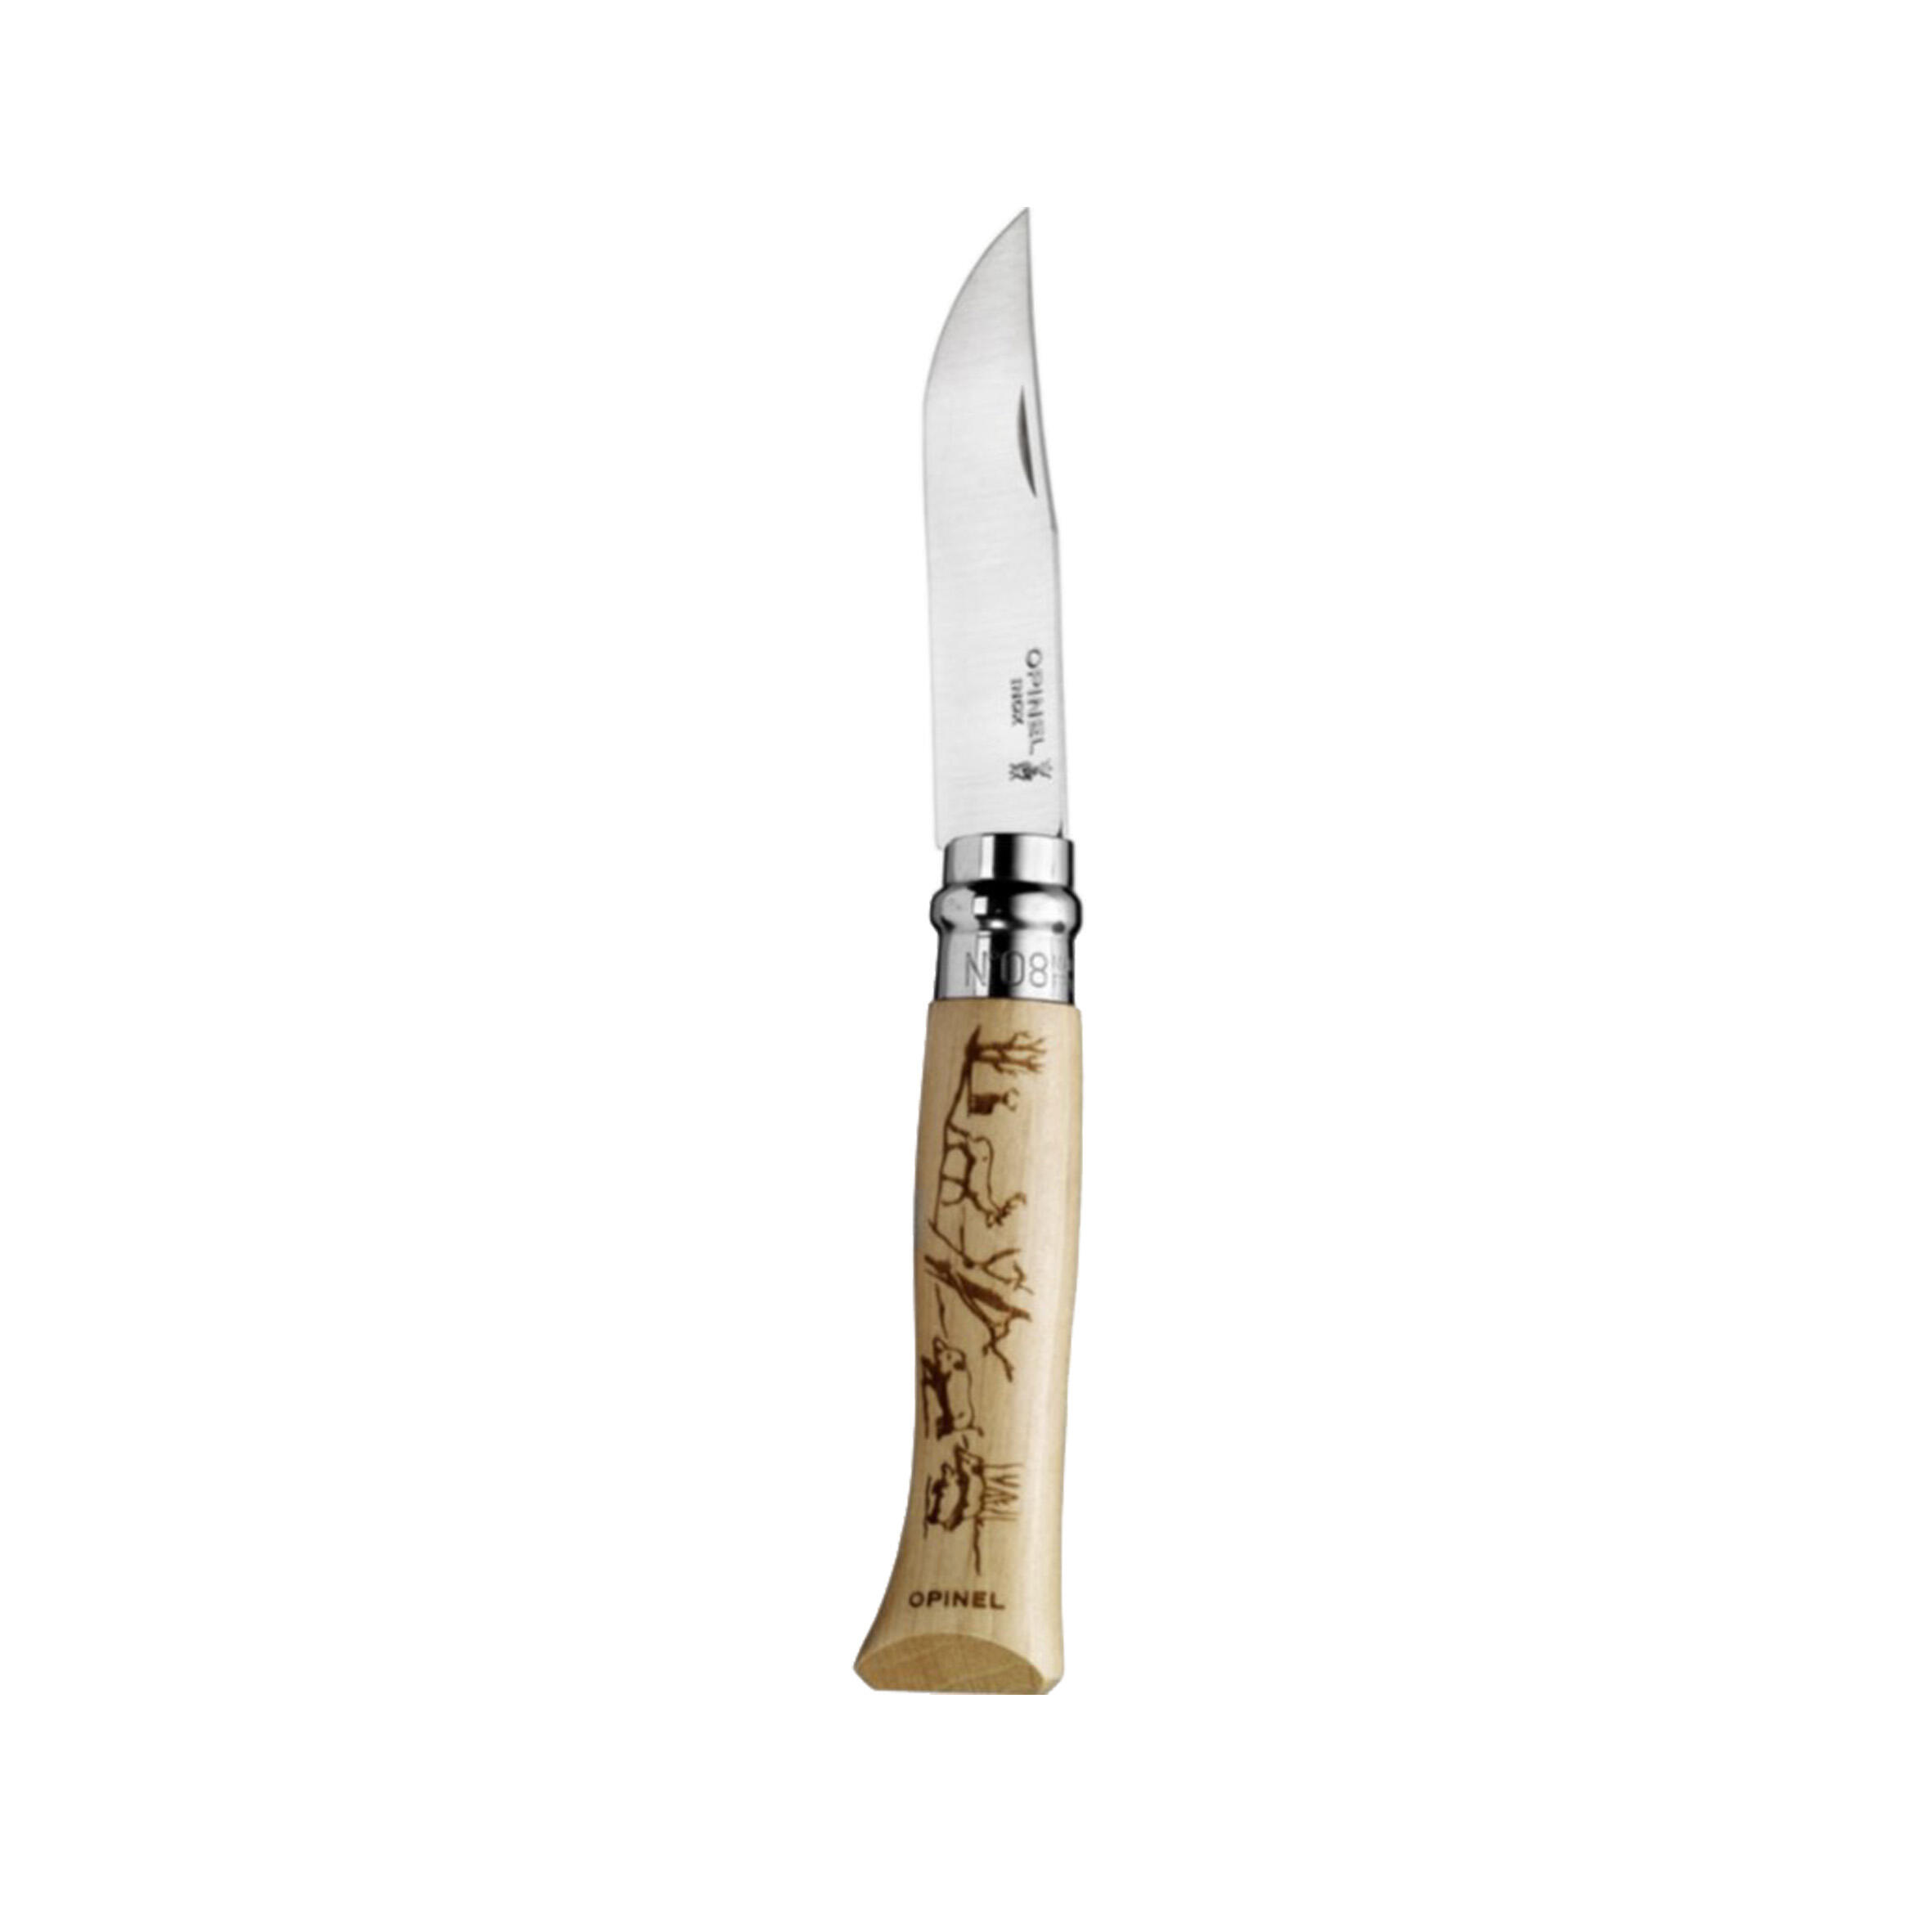 Image of Folding Stainless-steel Hunting Knife - Opinel No.8 8.5 cm